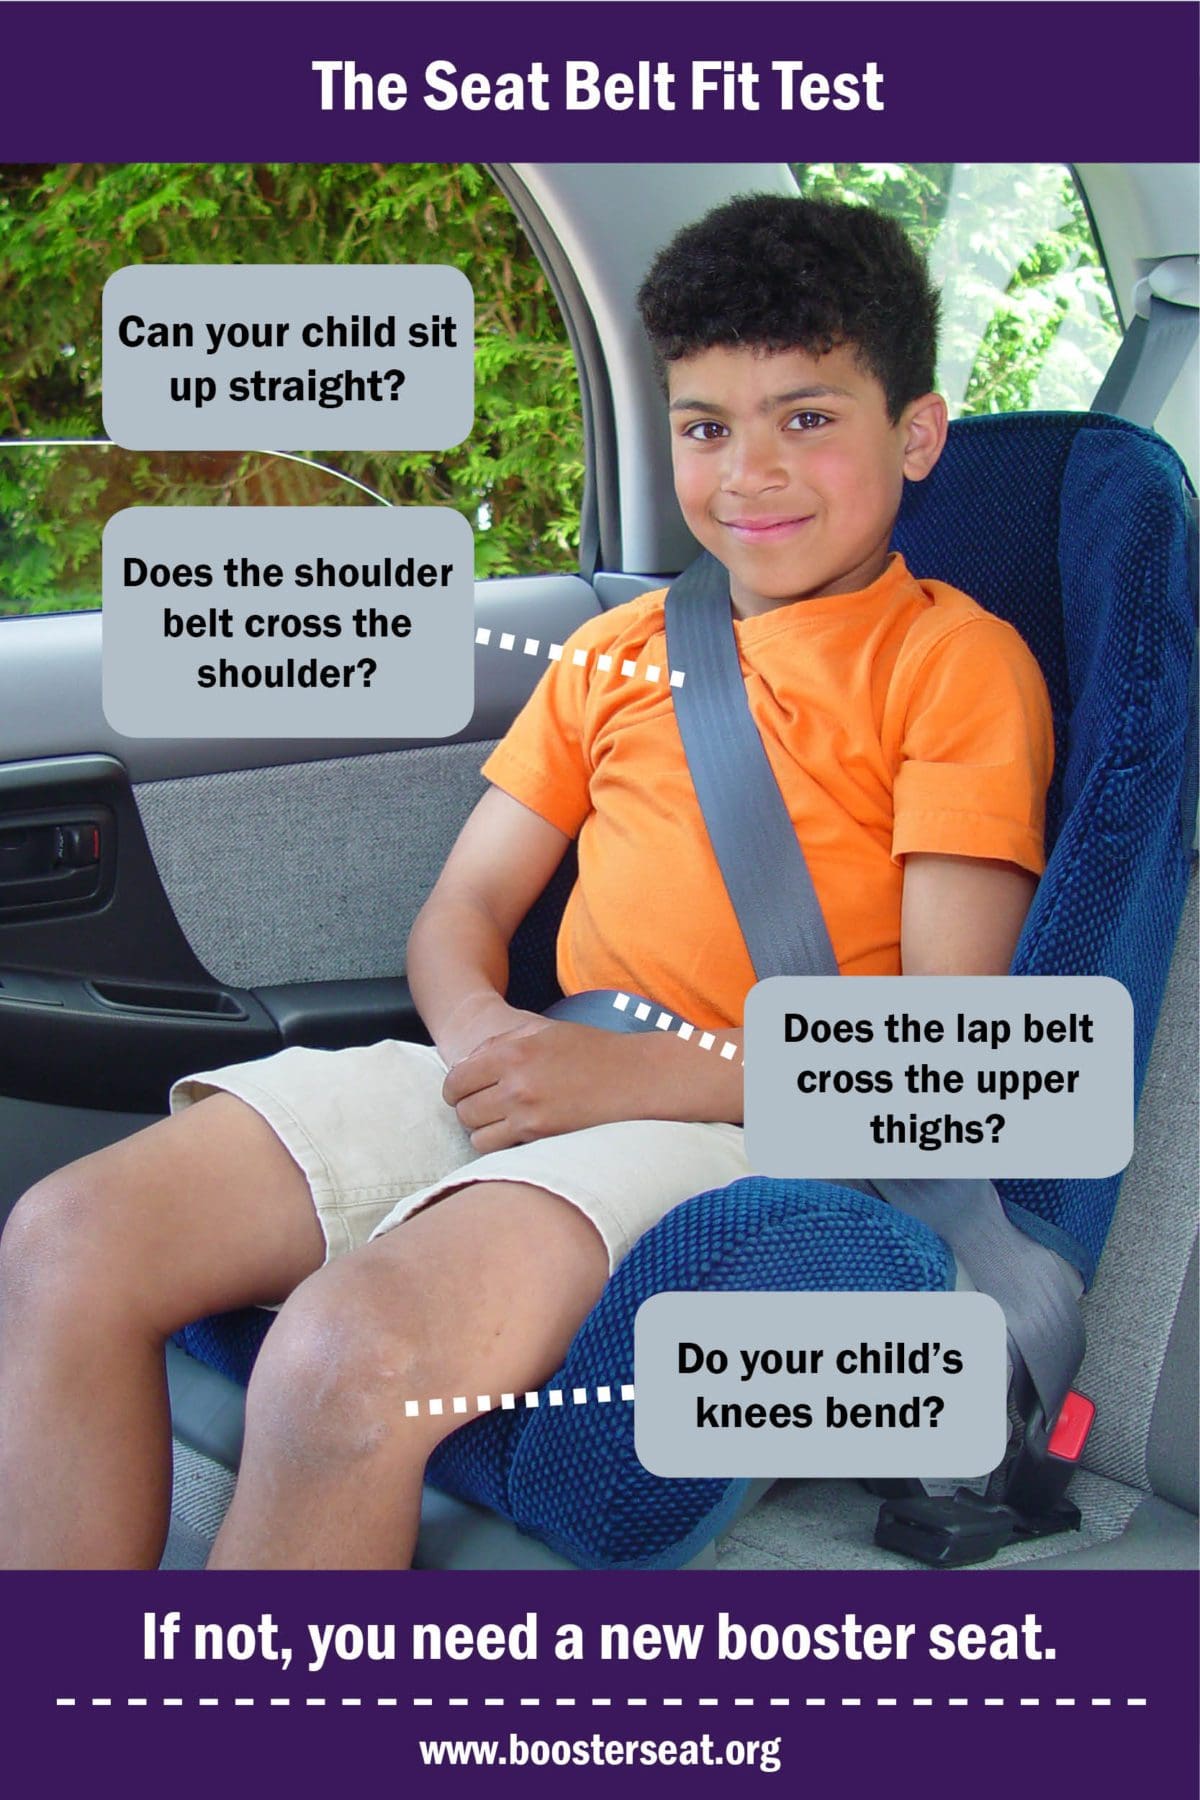 The Seat Belt Fit Test: Can your child sit up straight? Does the shoulder belt cross the shoulder? Does the lap belt cross the upper thighs? Do your child's knees bend? If not, you need a new booster seat. www.boosterseat.org